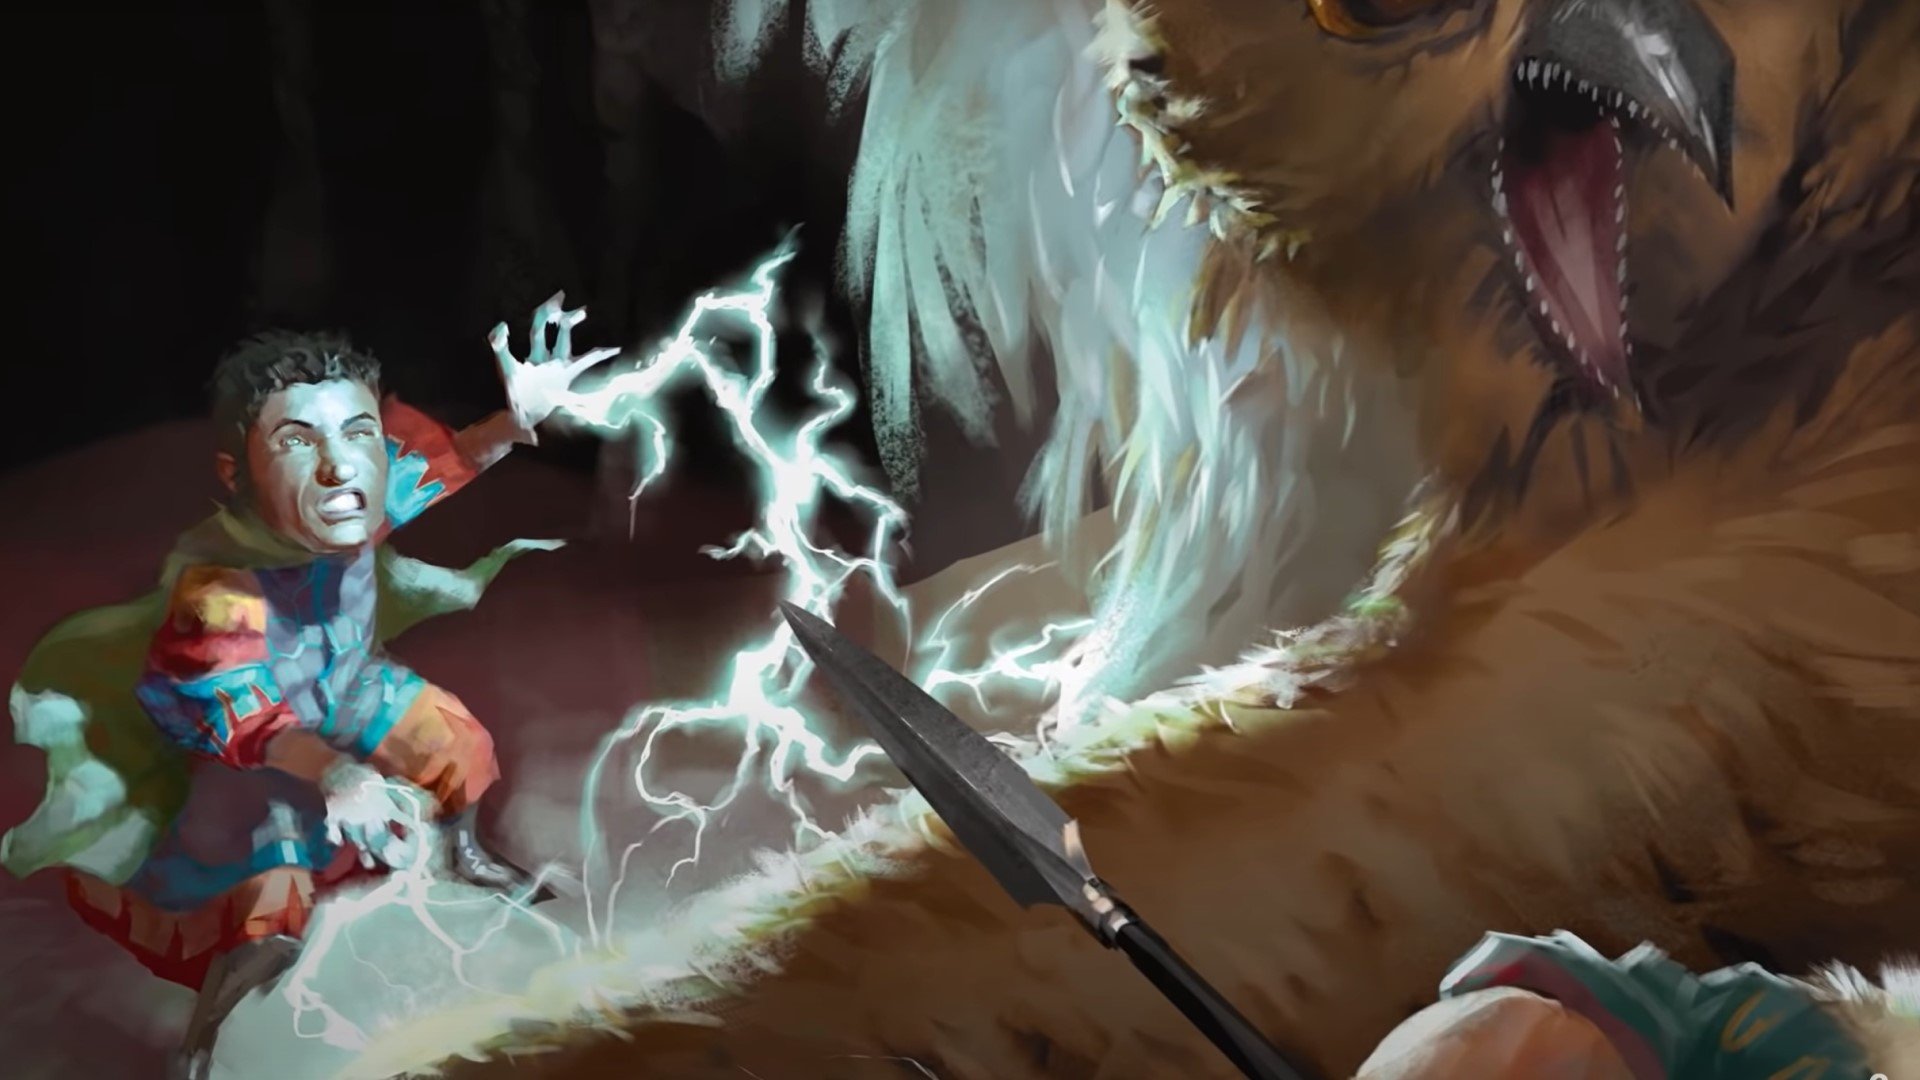 DnD Green Flame Blade 5e - Wizards of the Coast art of a gnome spellcaster in combat